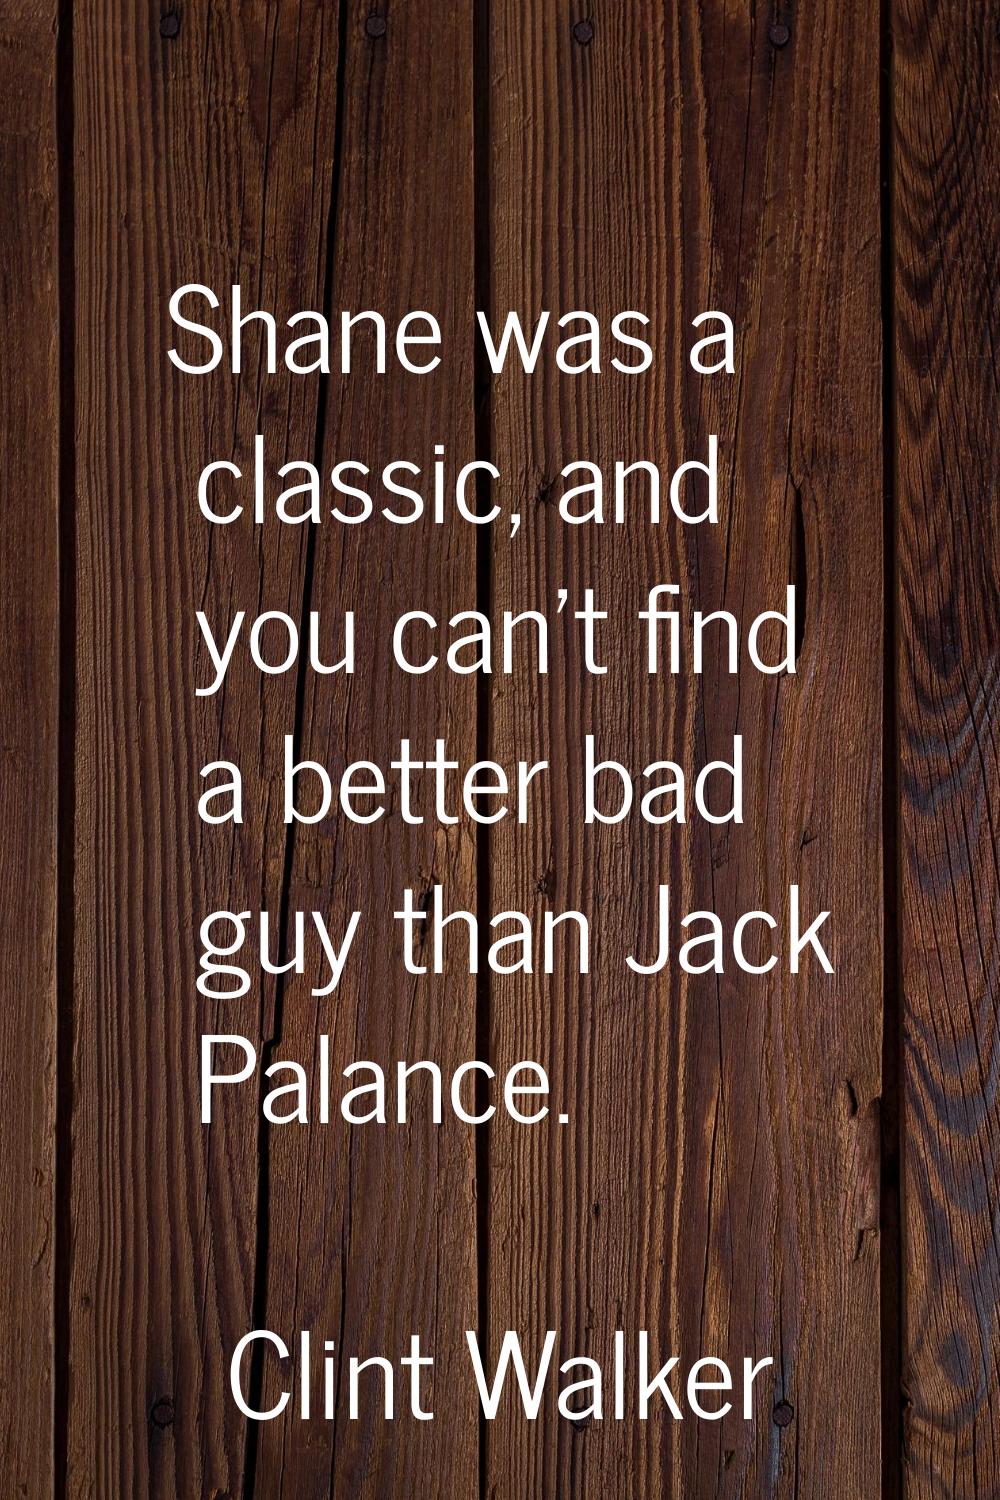 Shane was a classic, and you can't find a better bad guy than Jack Palance.